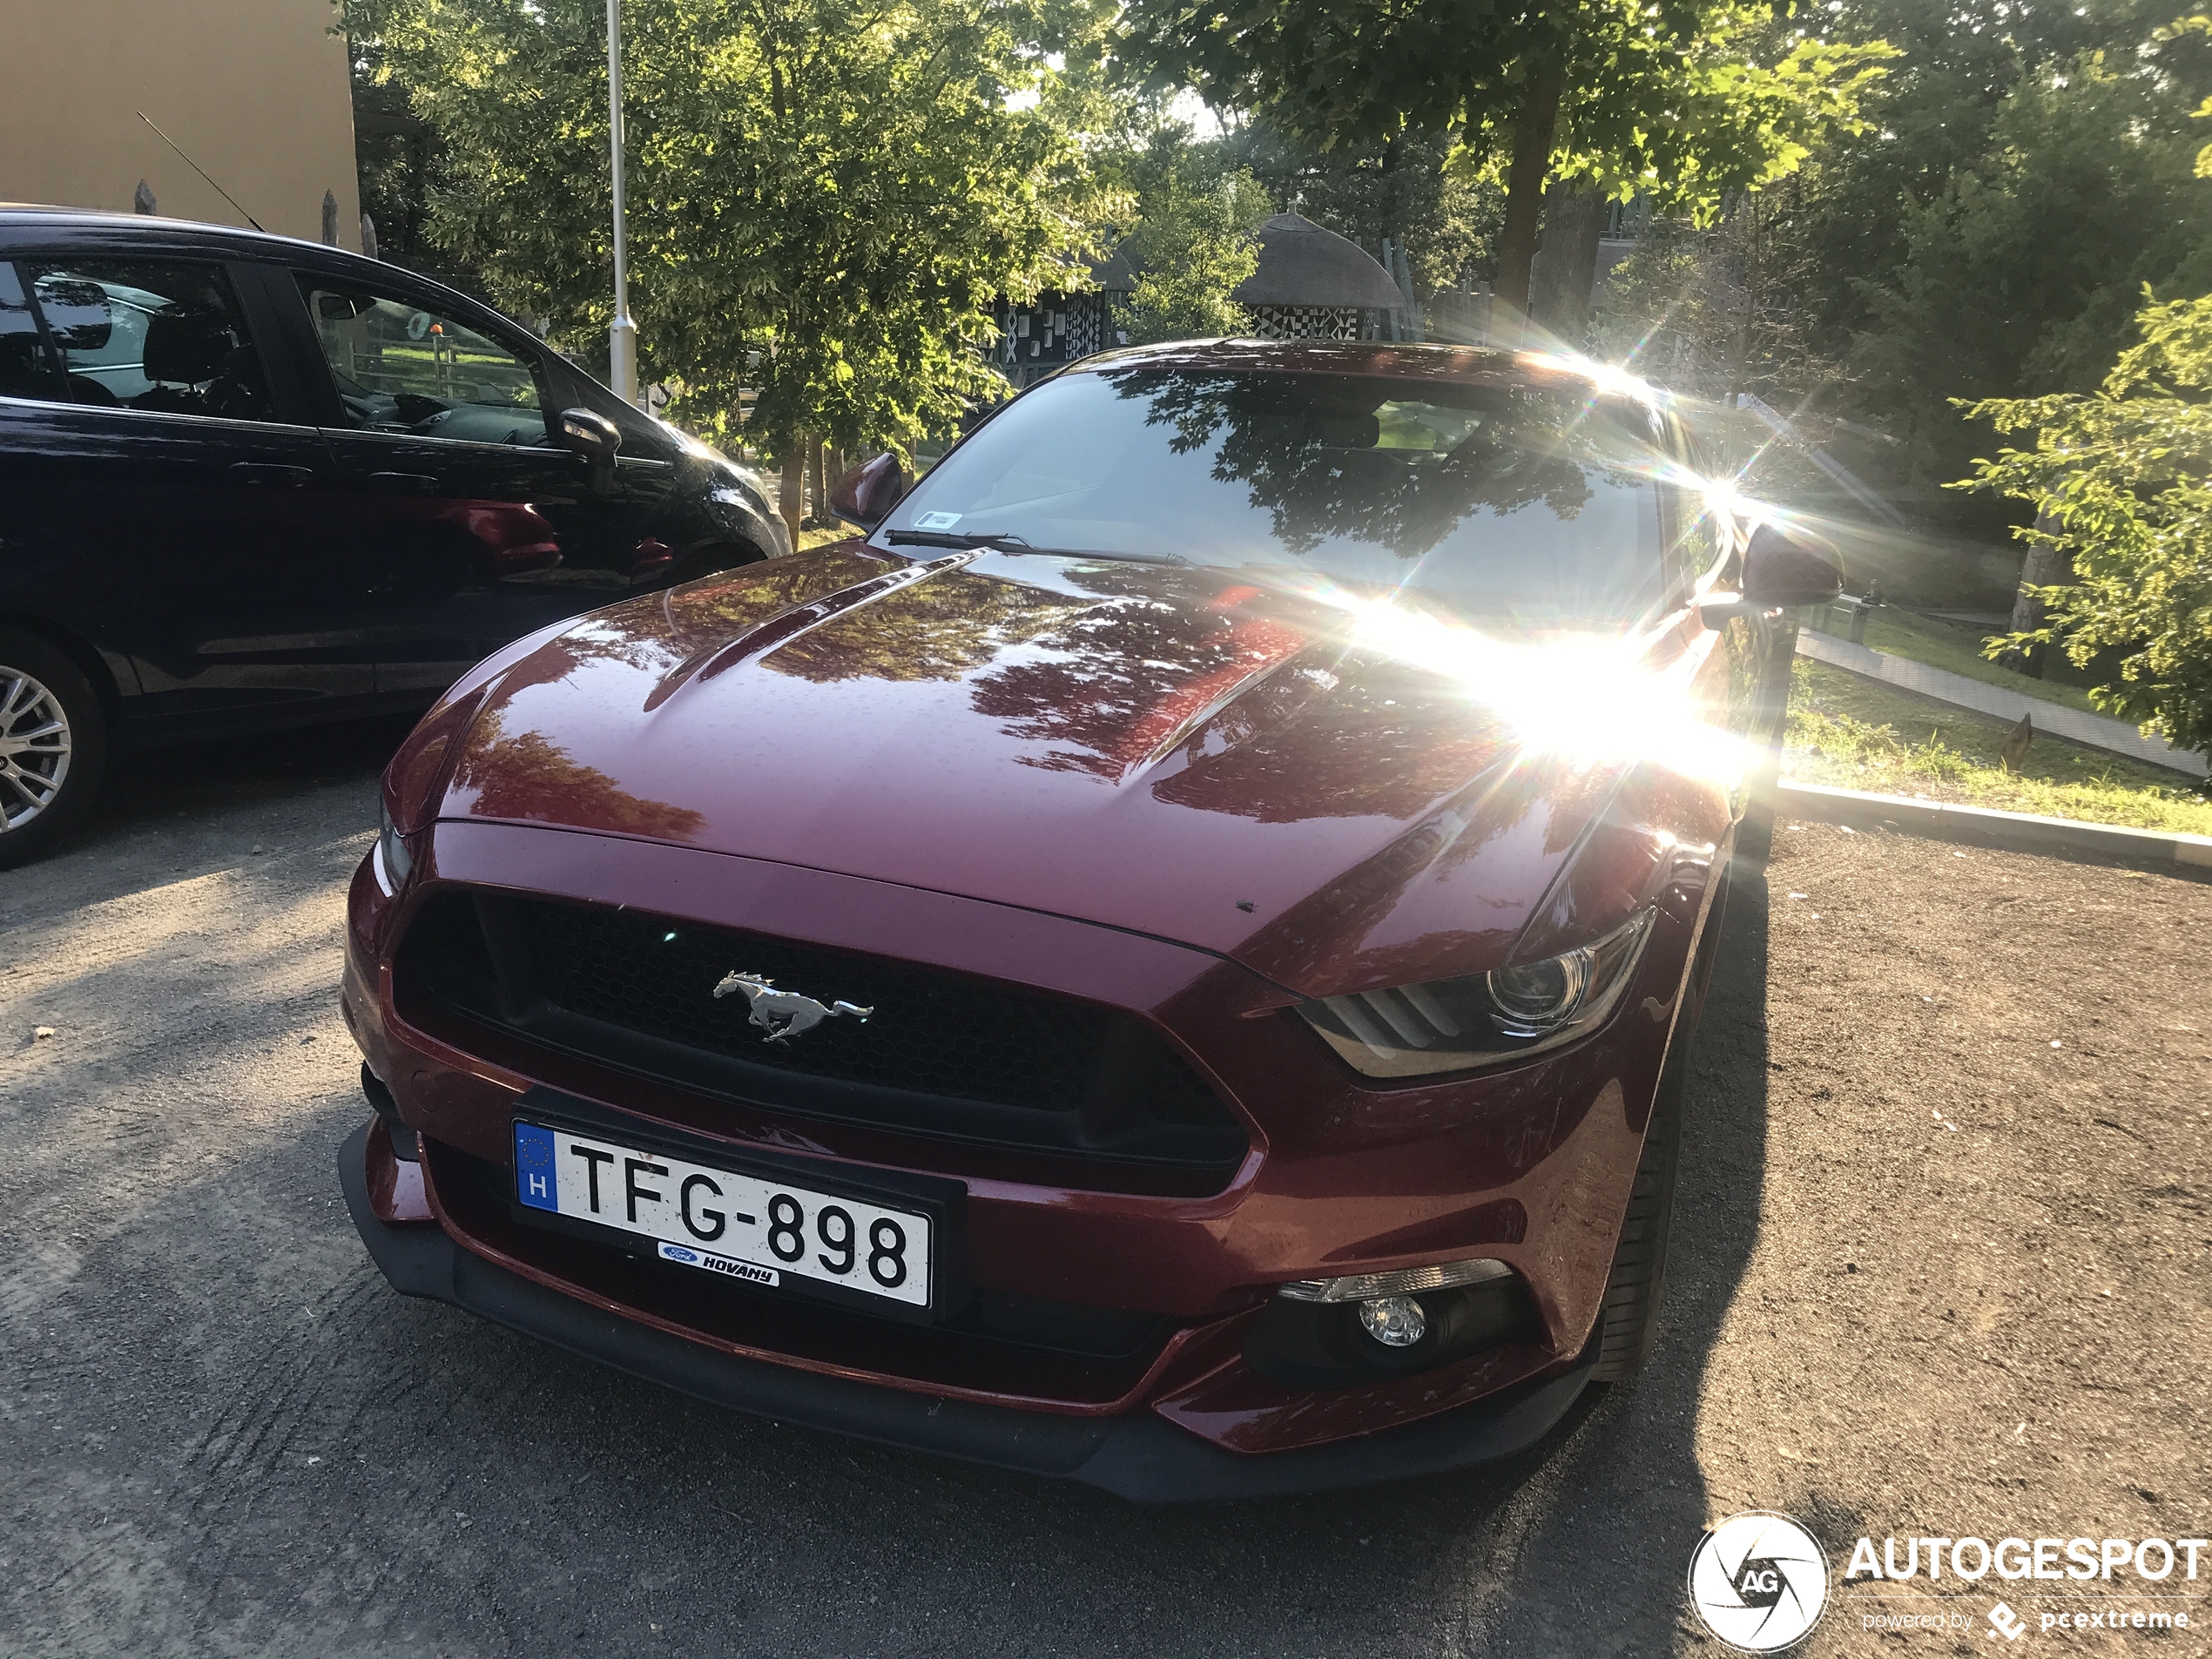 Ford Mustang GT rouge 2015 1/24